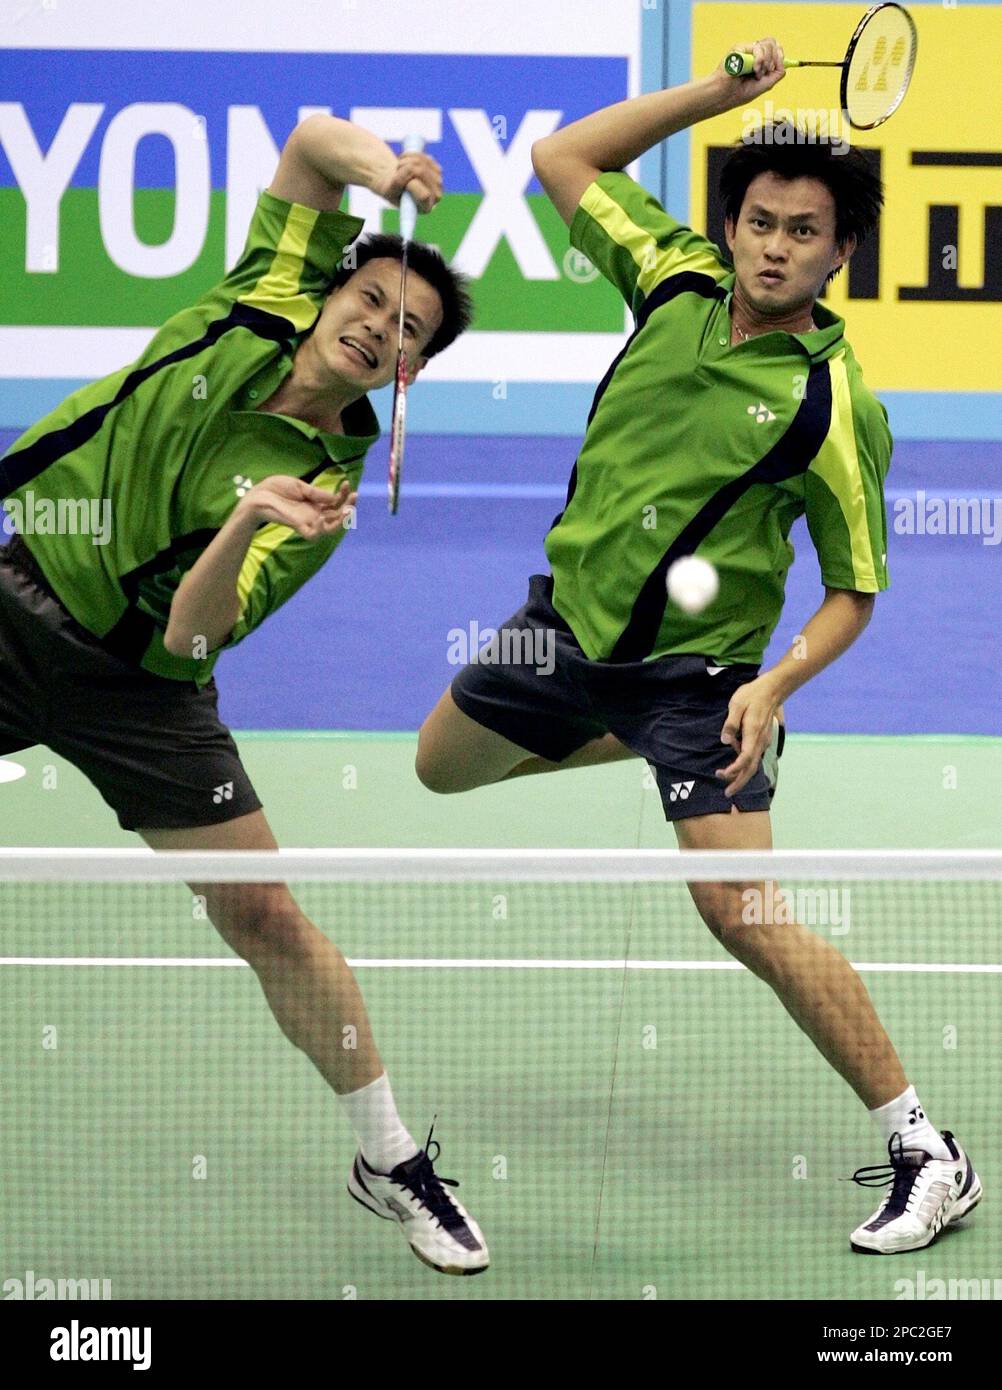 Tony Gunawan of the United States, left, and Candra Wijaya of Indonesia, right, return the shuttlecock against China during the mens doubles quarterfinals in the 2007 Yonex Korea Open Badminton Super Series